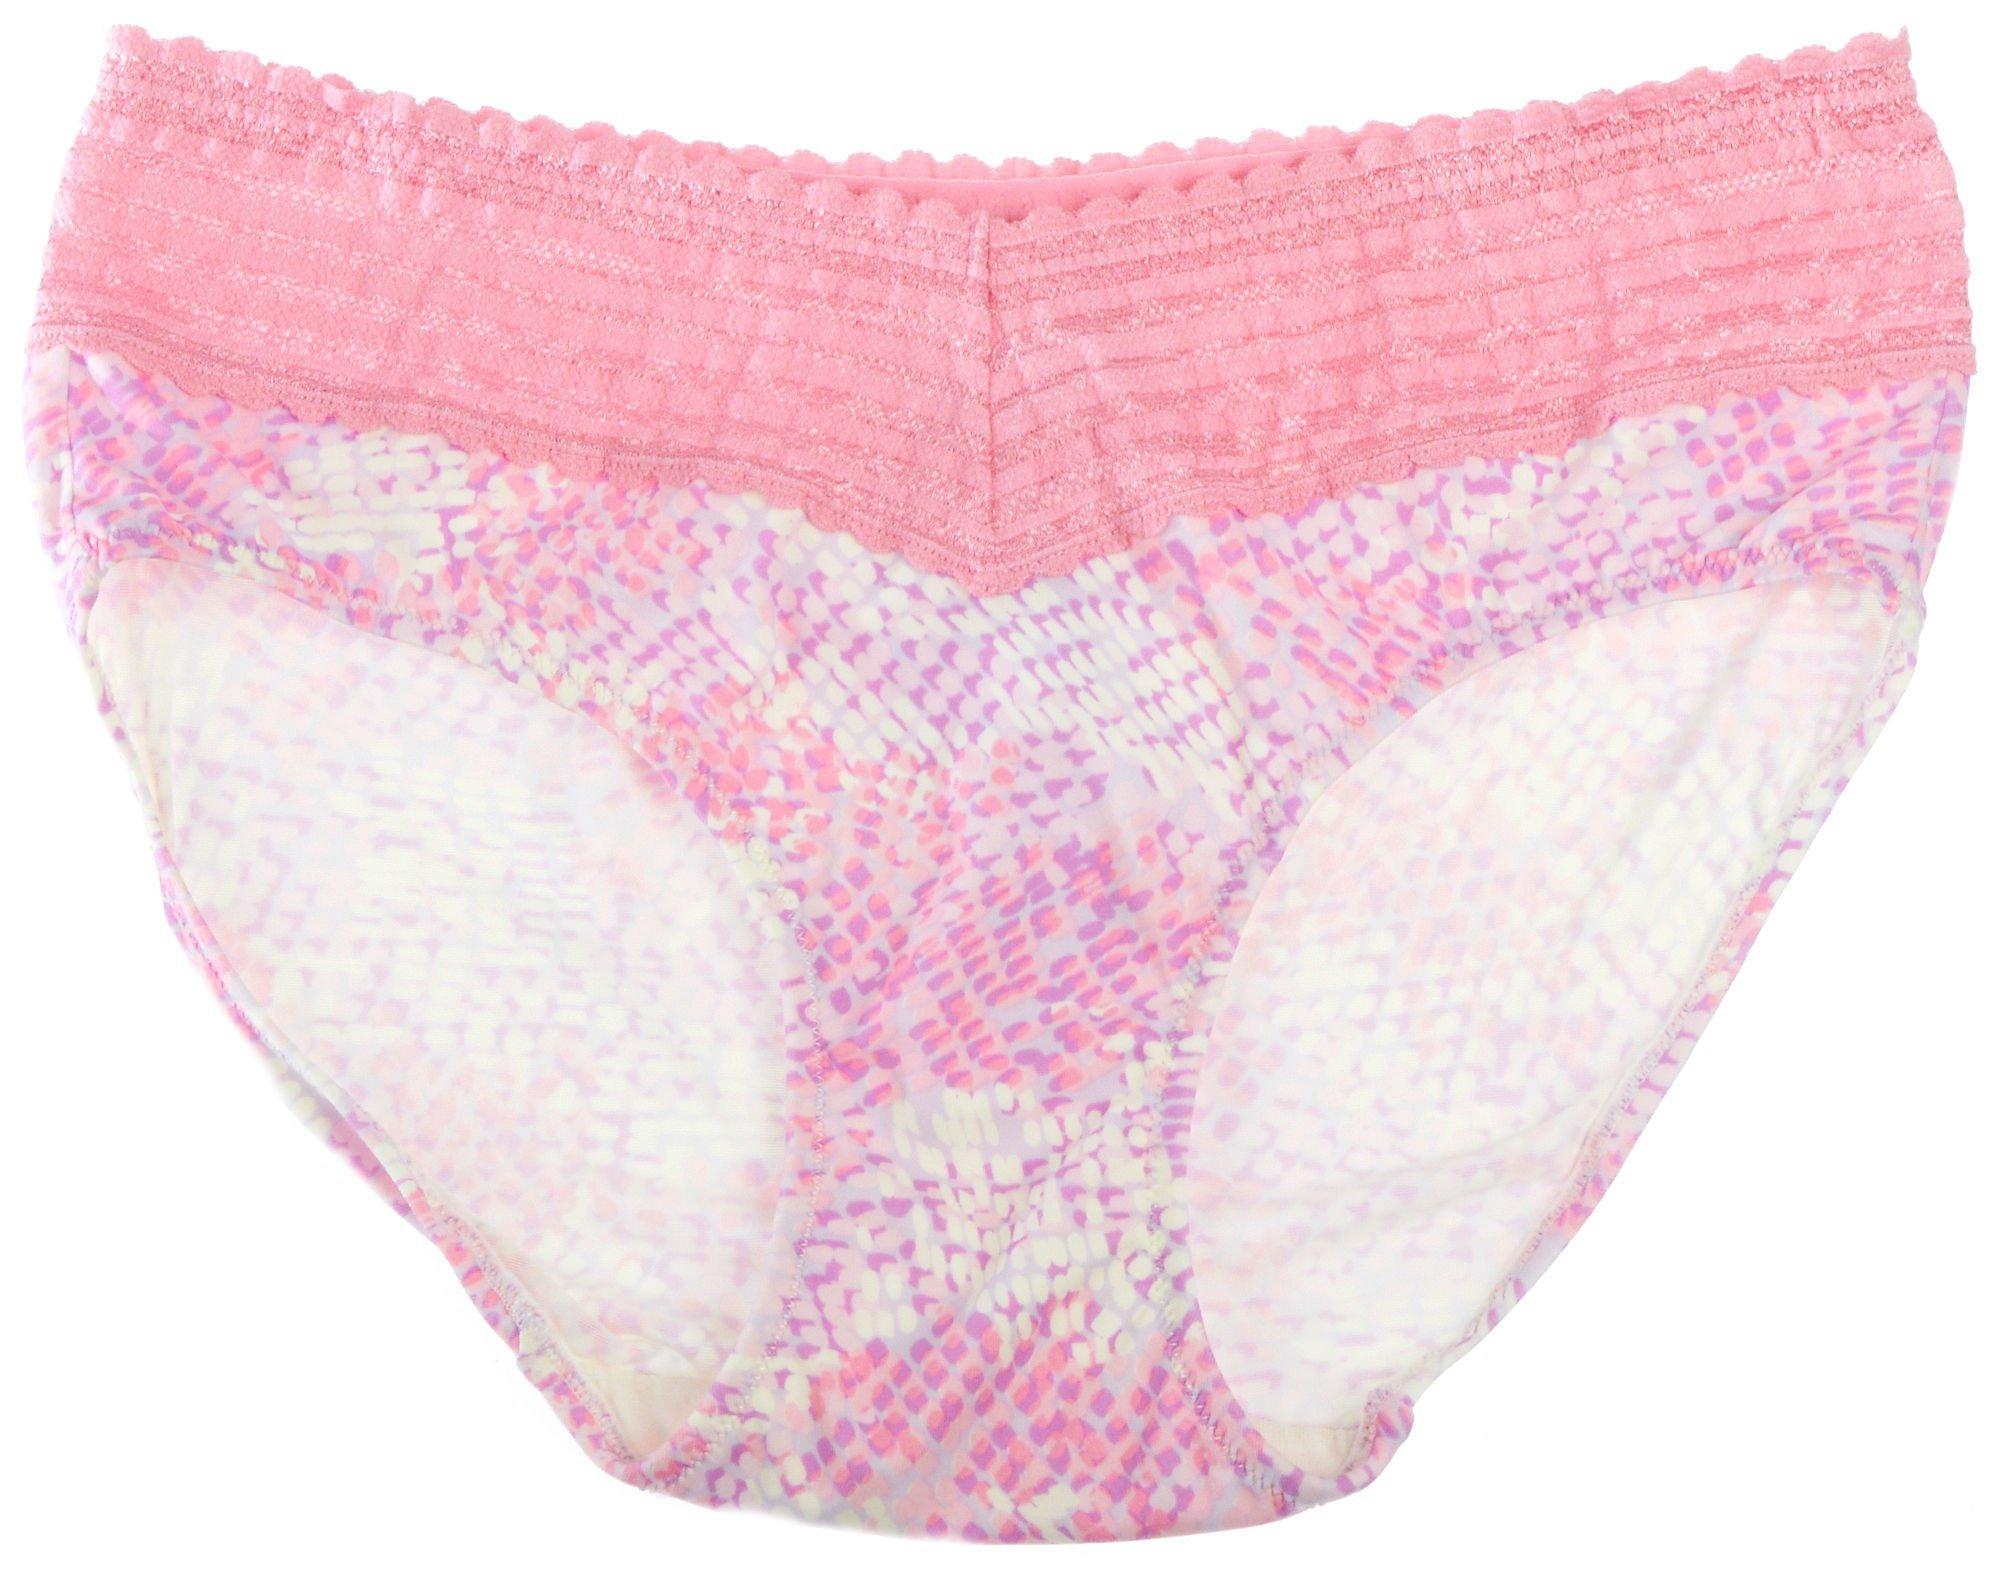 Gloria Vanderbilt Ladies' Hipster with Lace, 5-Pack (L, Fashion) 